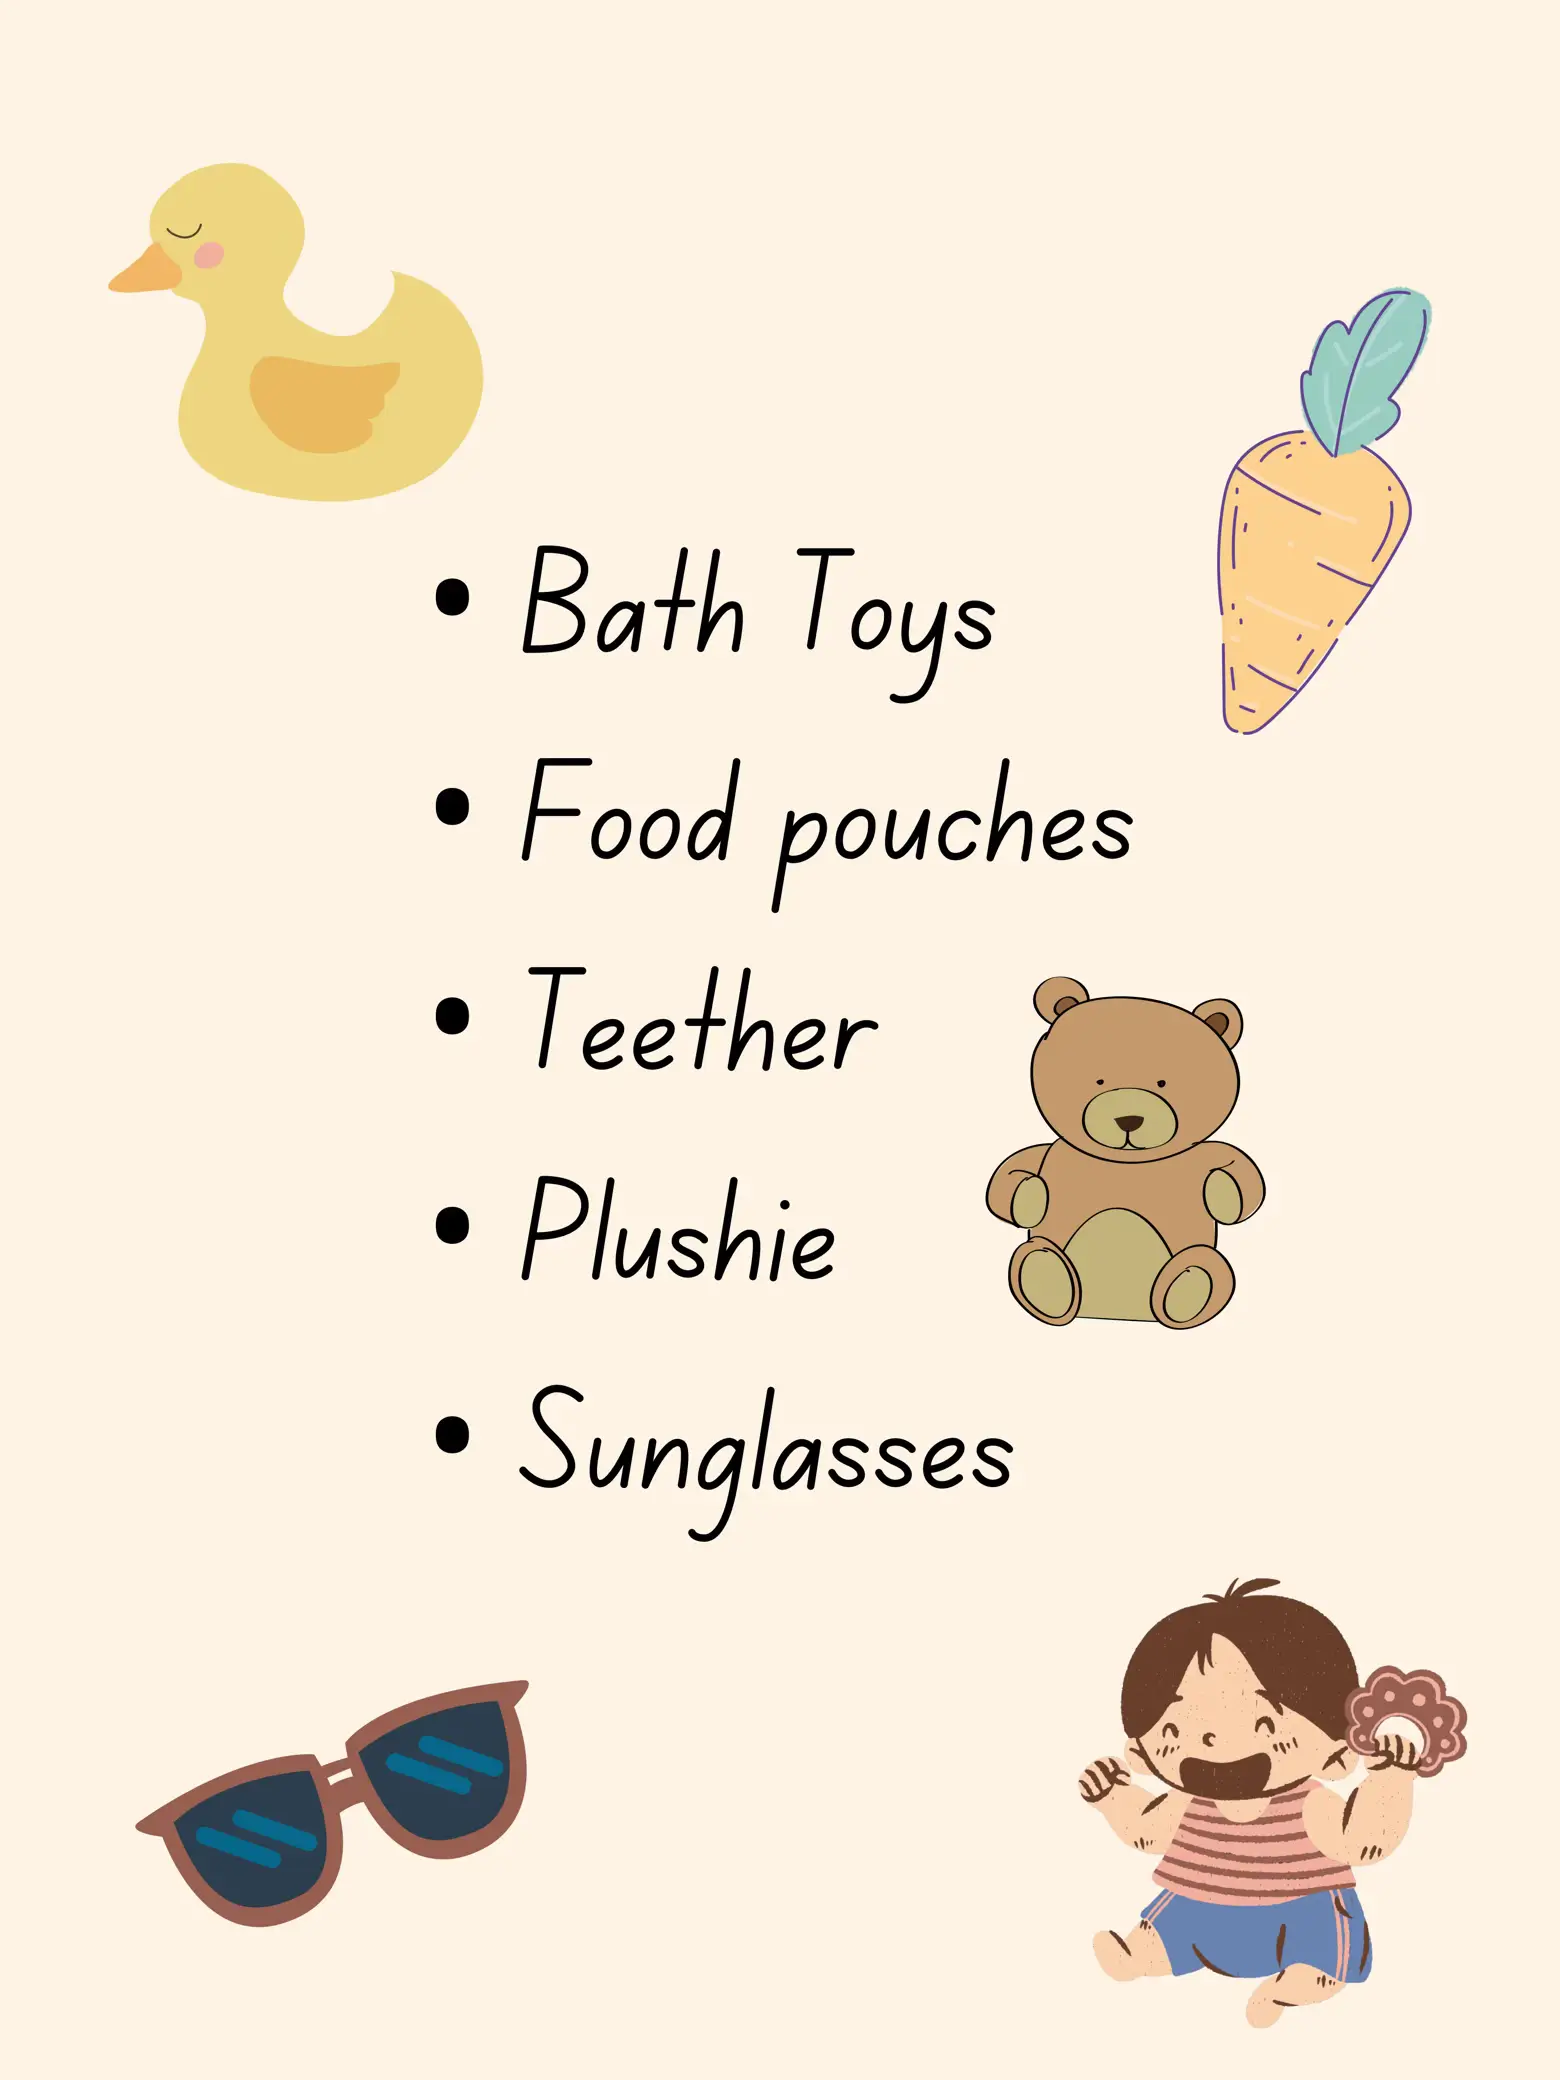  A list of baby items including a bath toy, food pouches, teether, and a plushie.